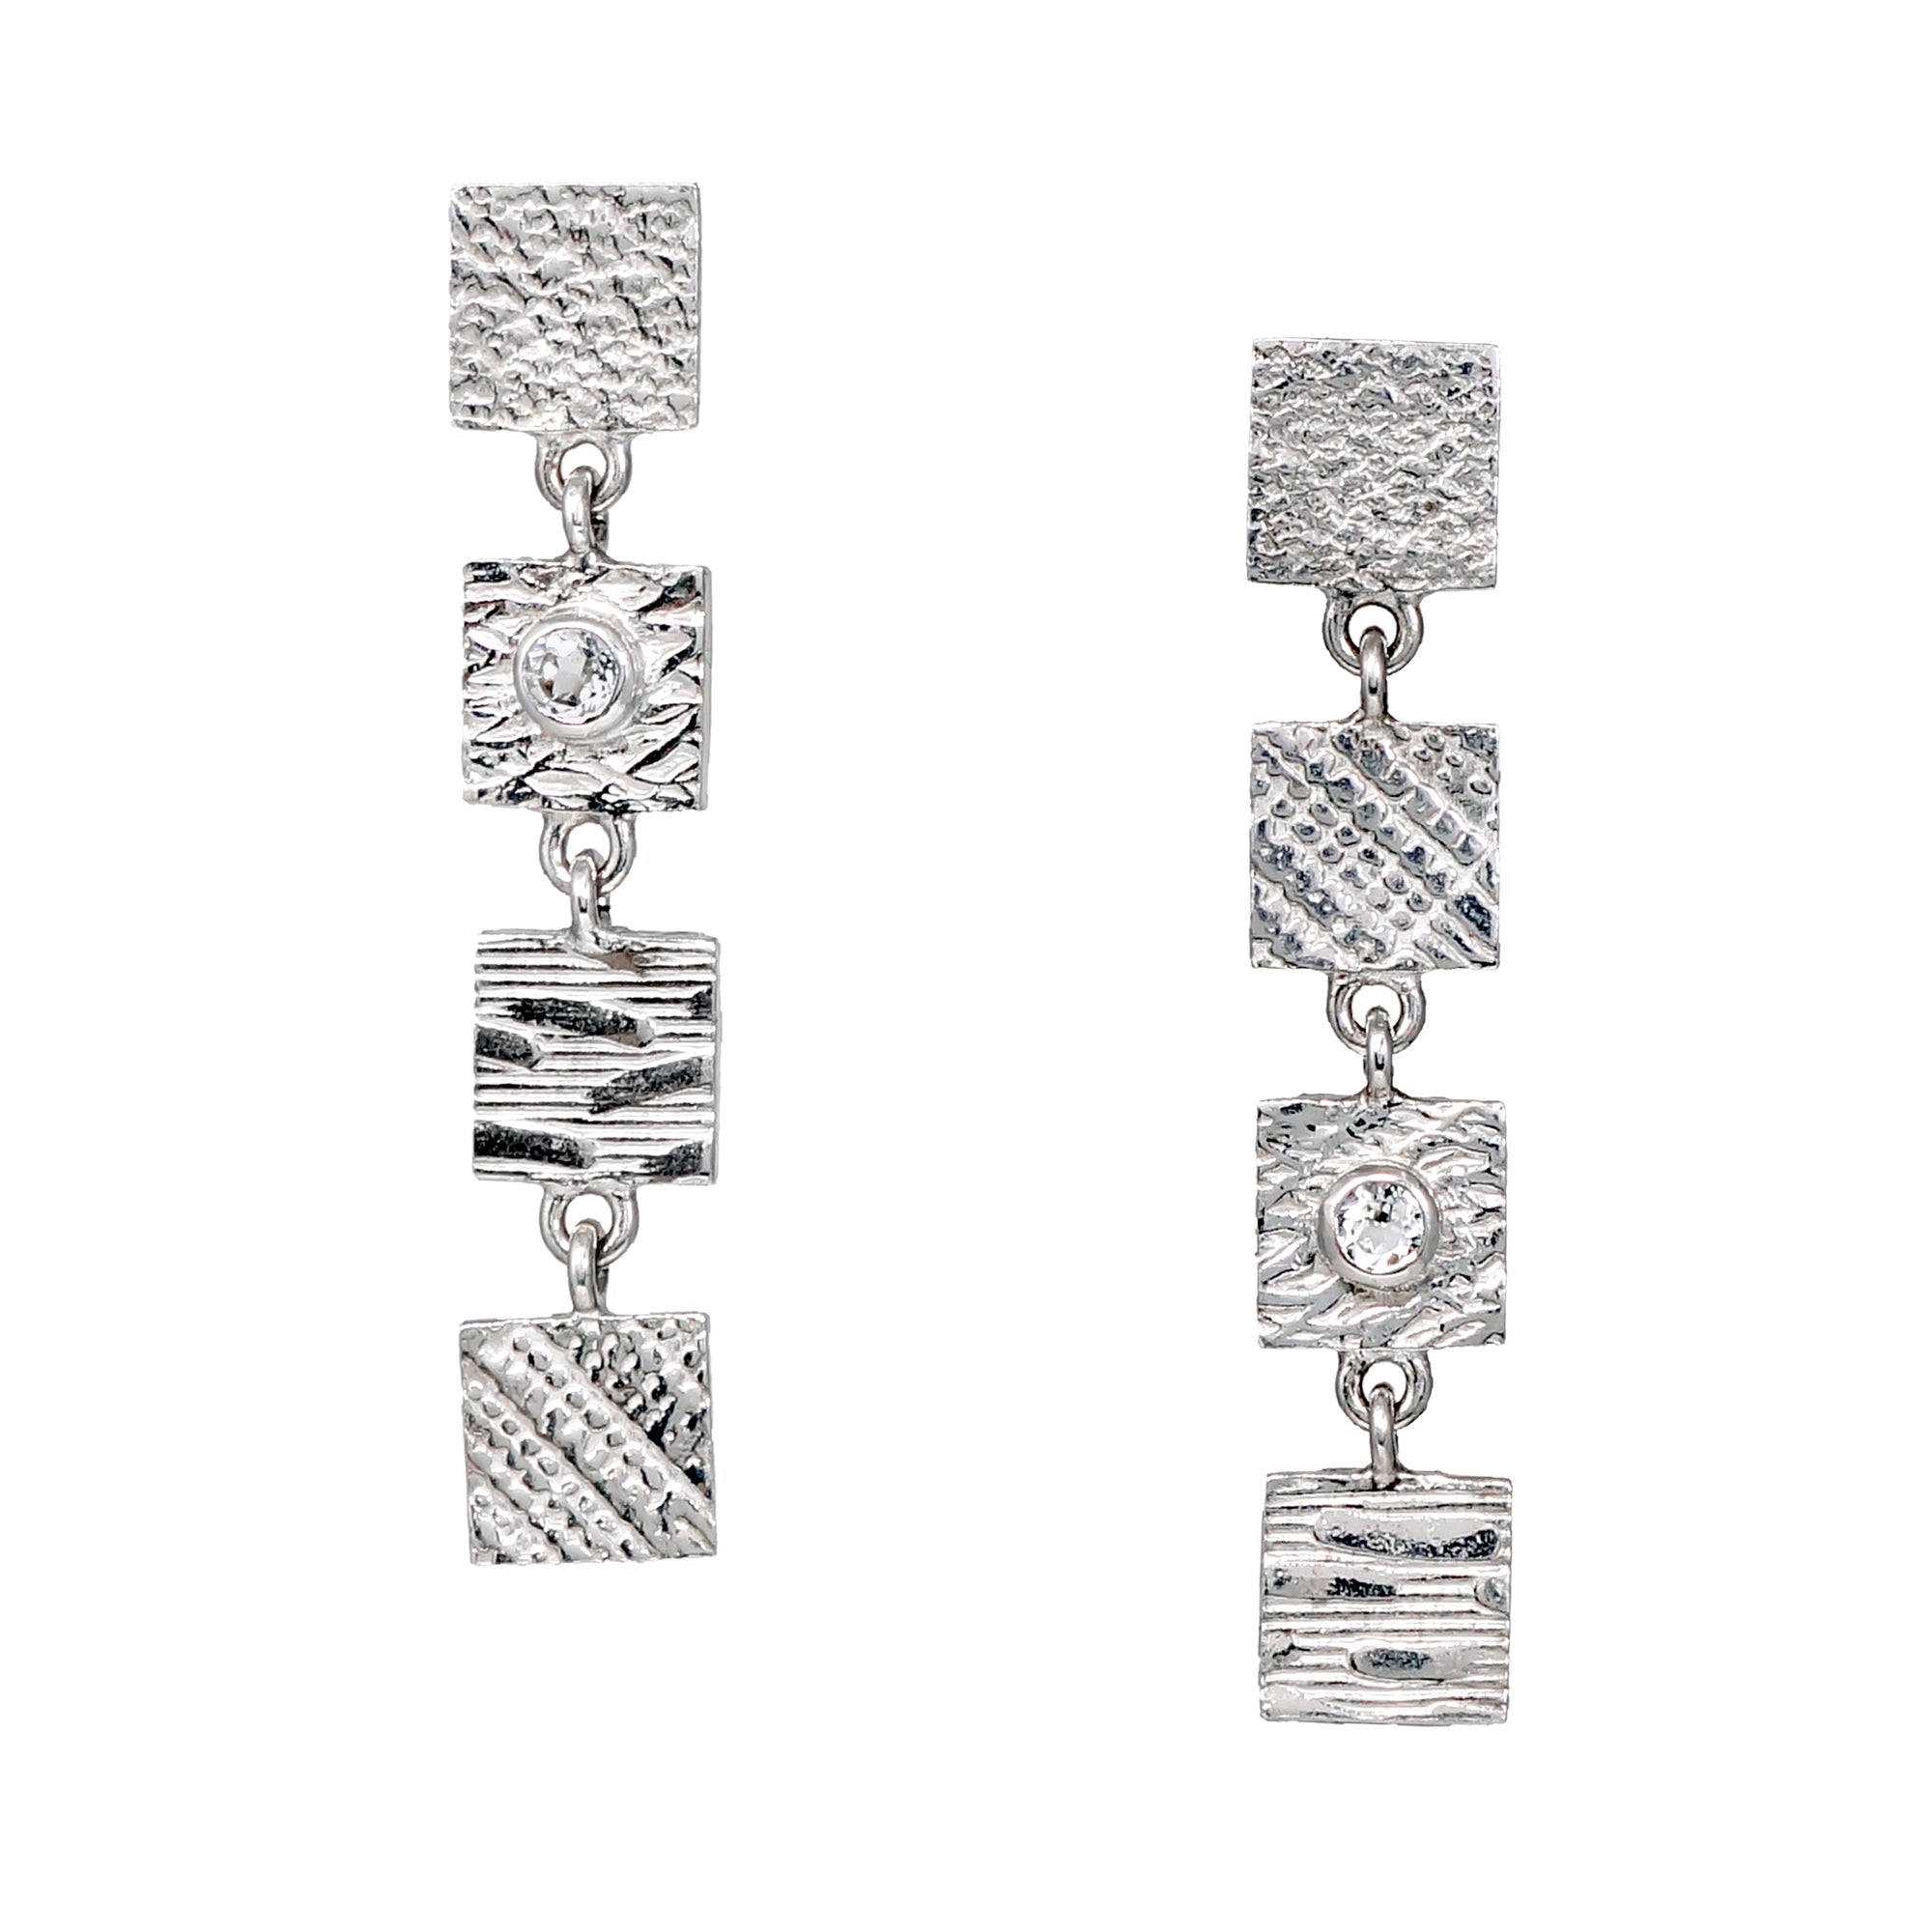 4 Tab Textured Earrings with White Sapphire